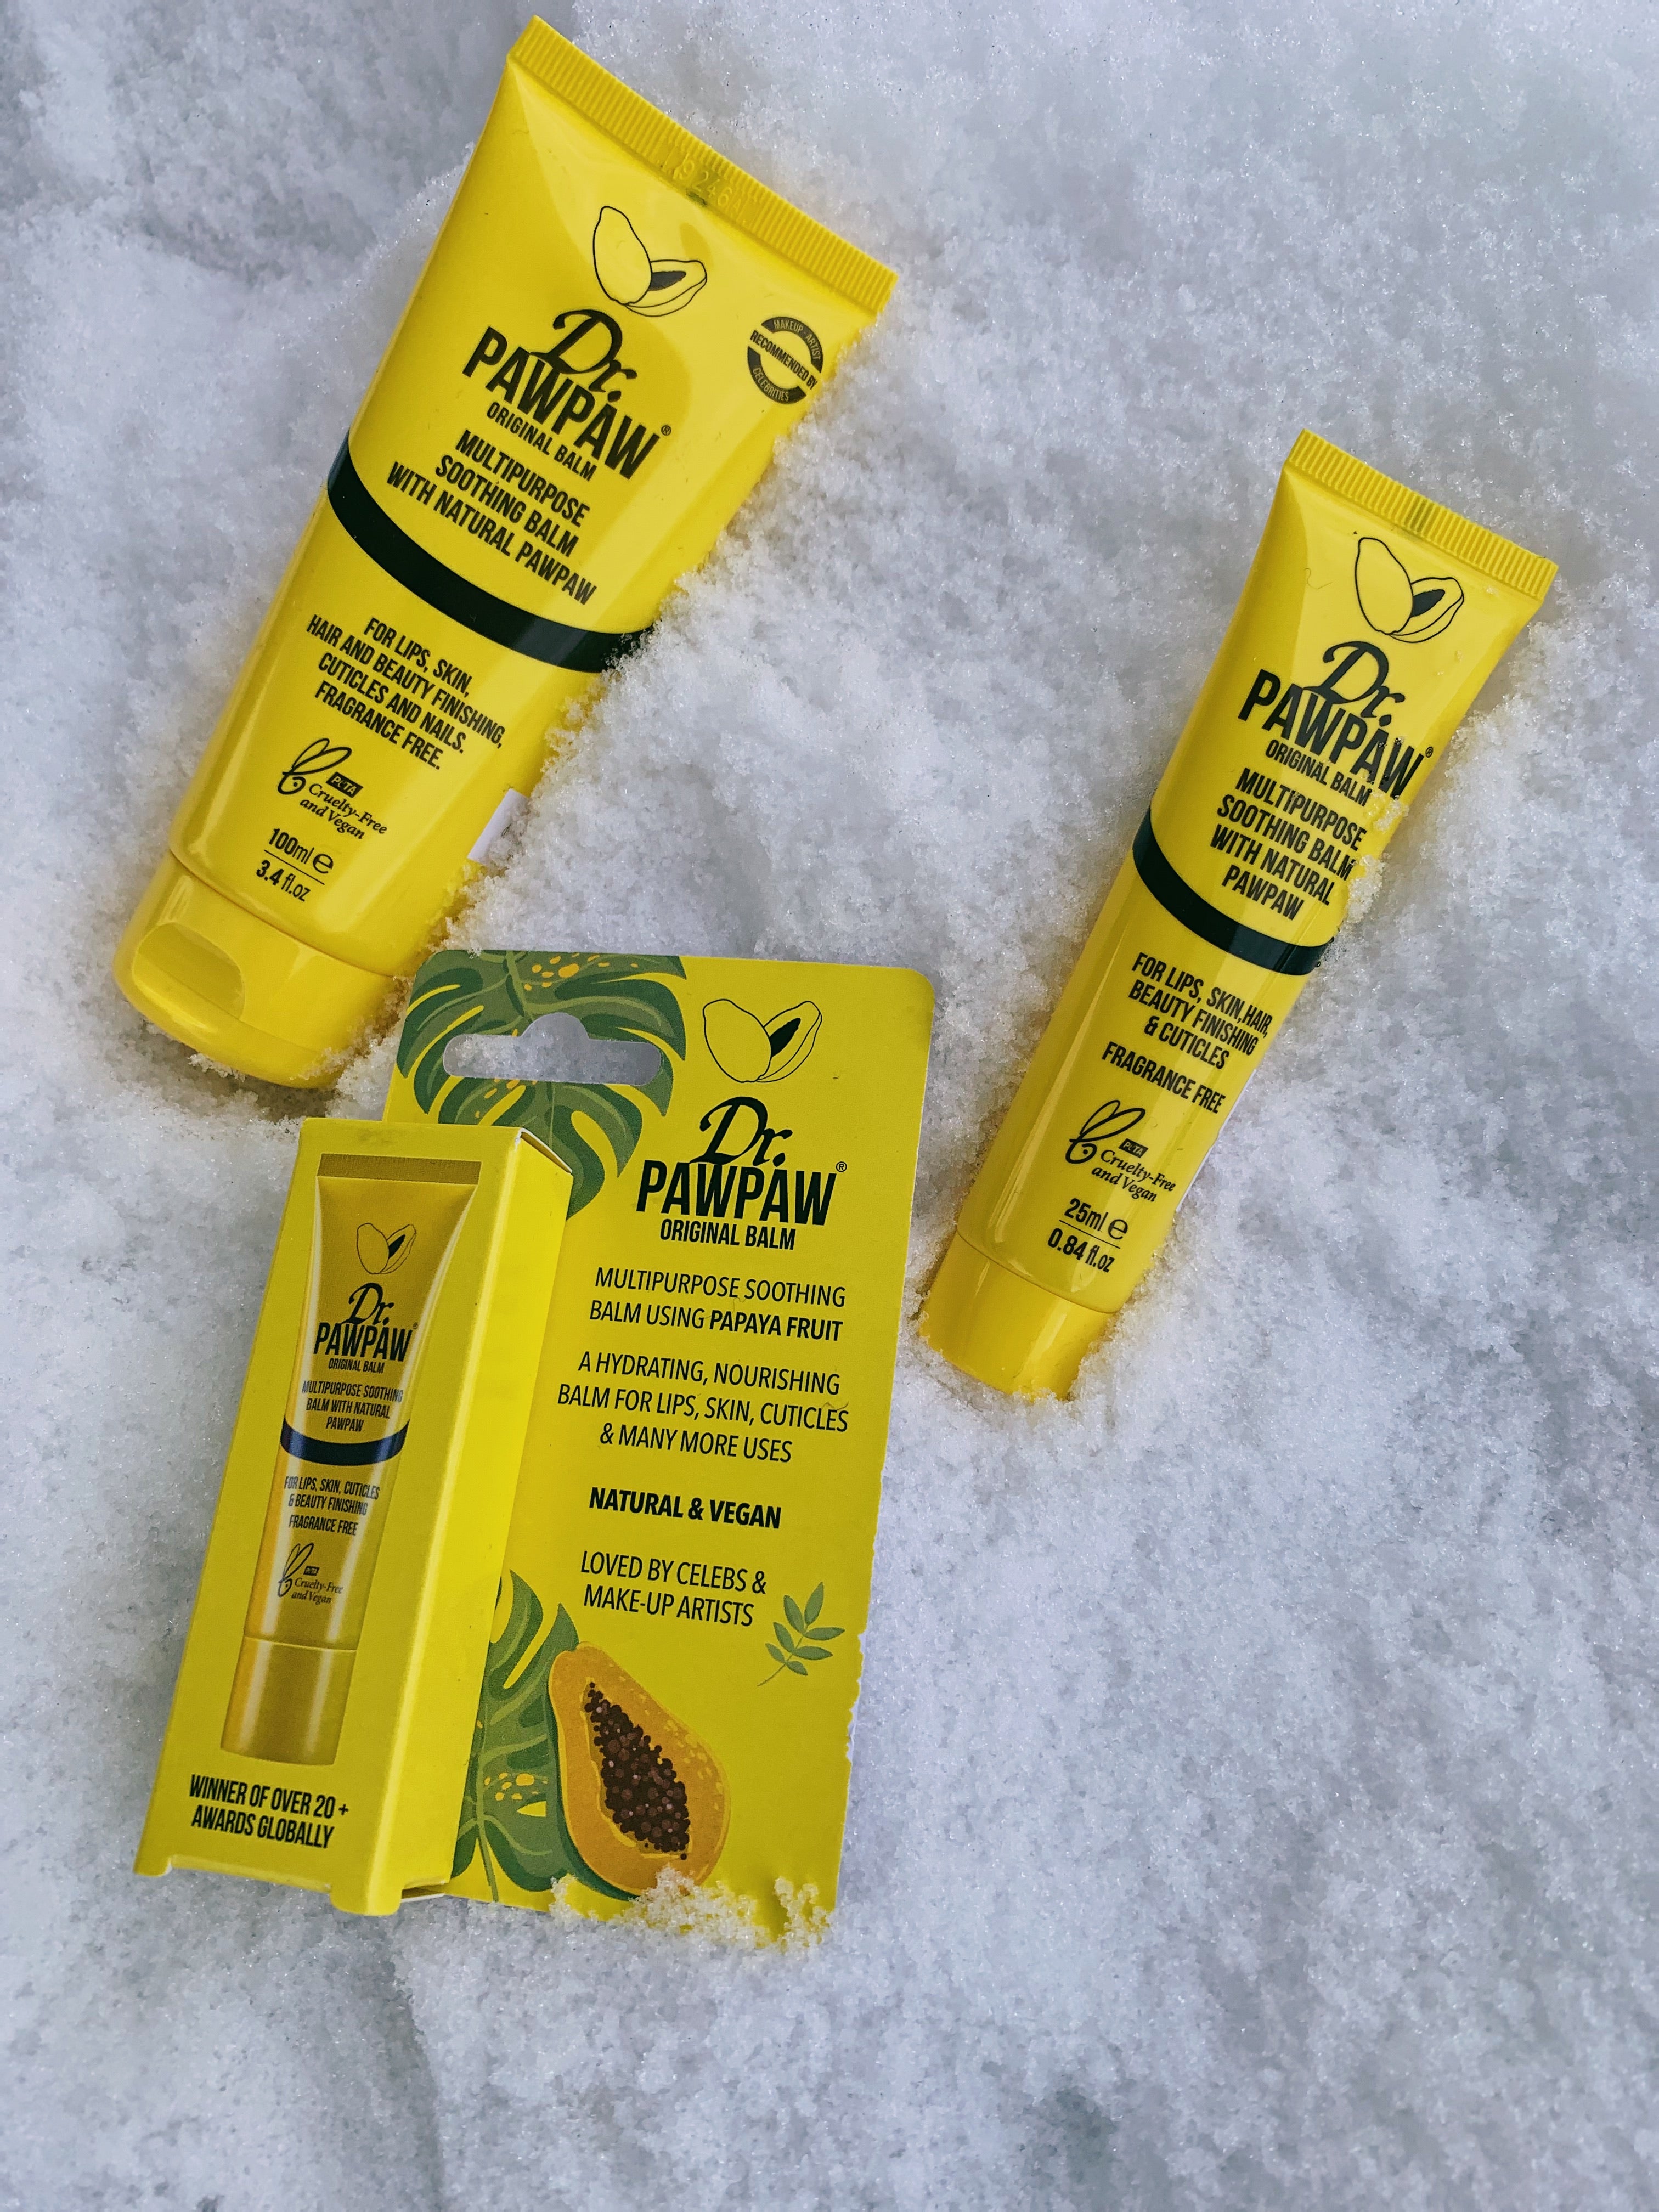 Dr.PAWPAW Original Clear Balm (The Iconic Yellow One!)